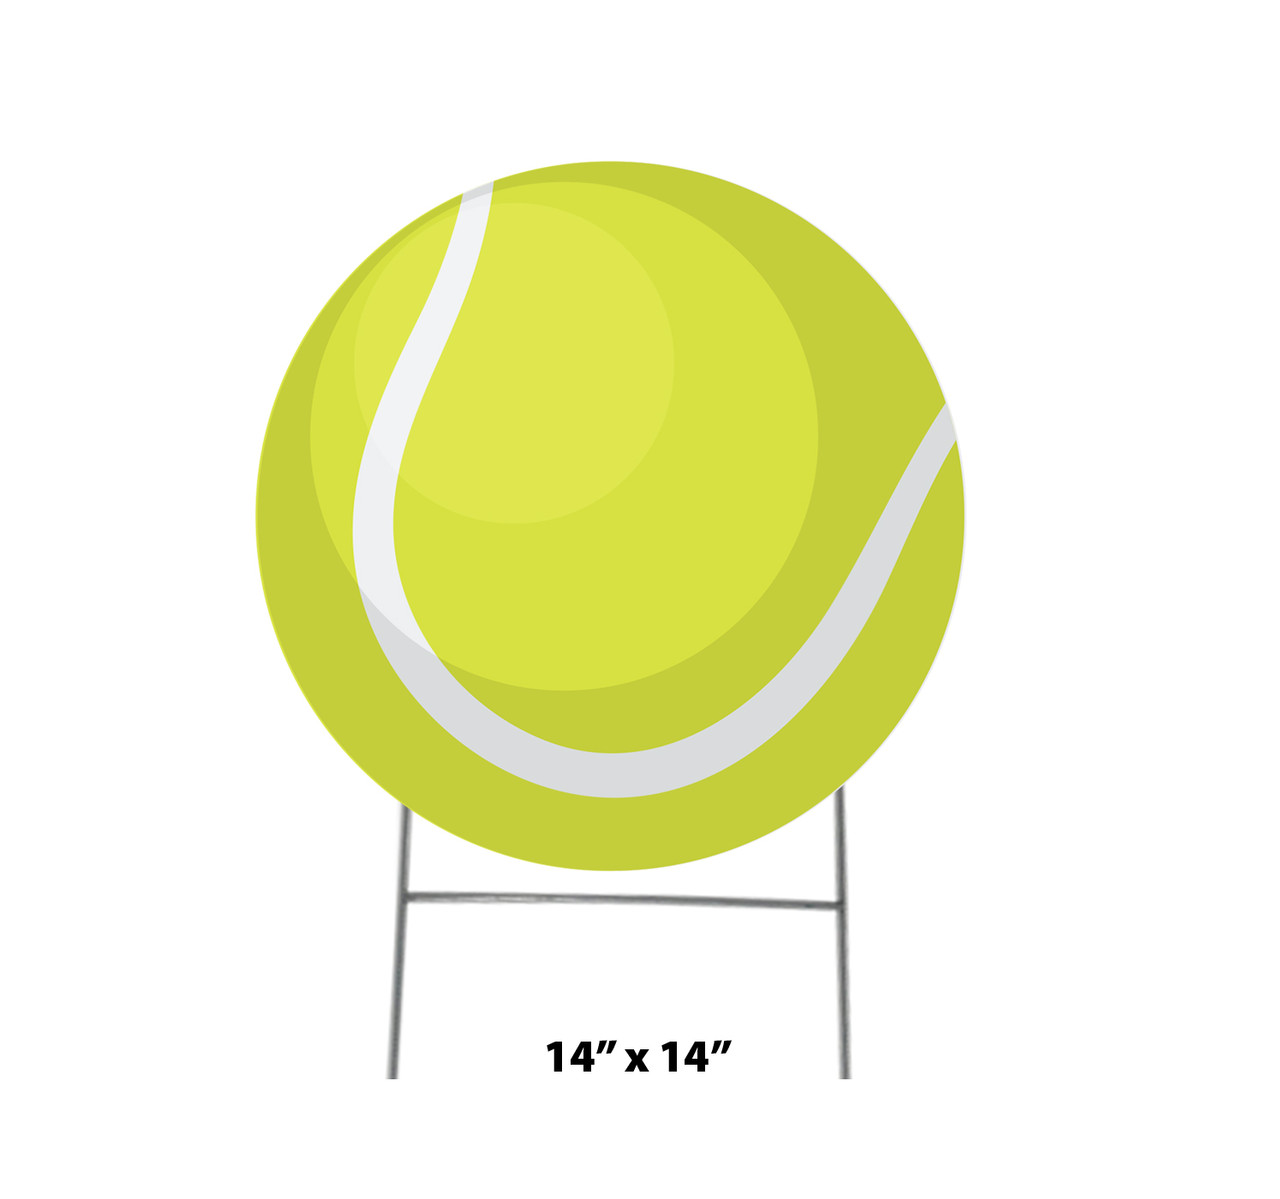 Coroplast outdoor yard sign icon of a tennis ball with dimensions.